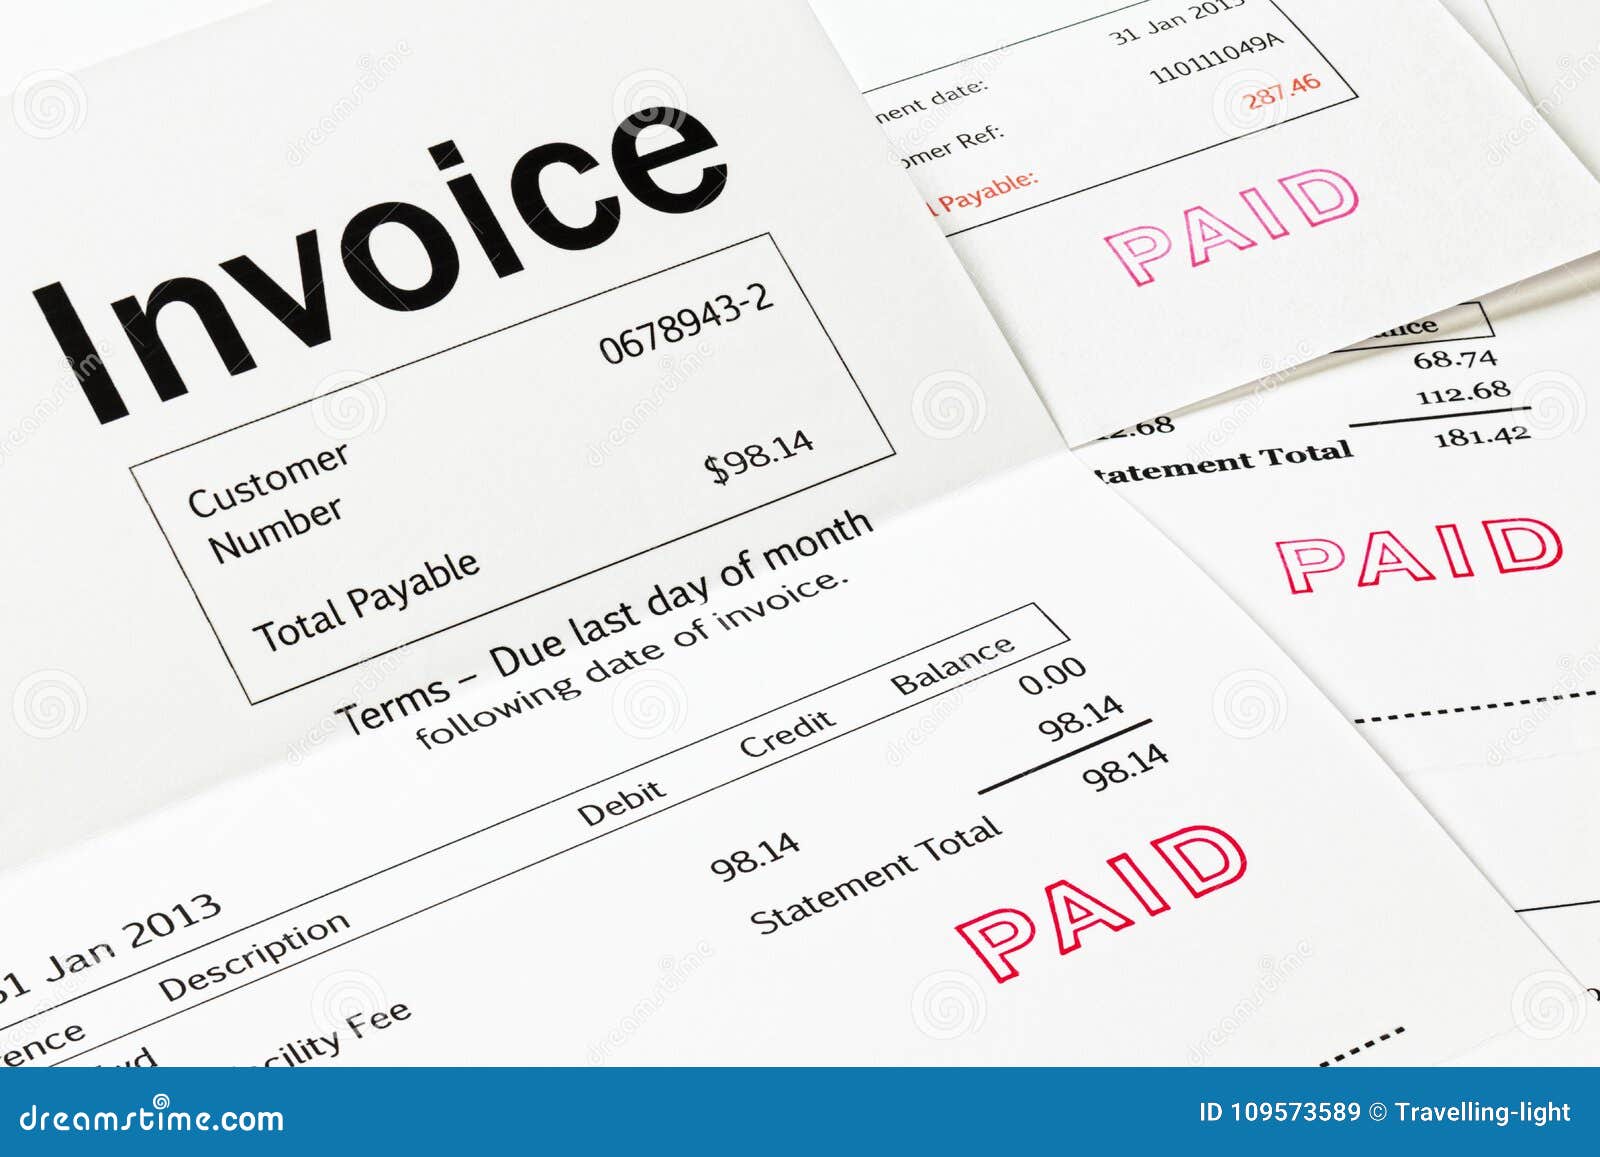 invoice with paid stamp